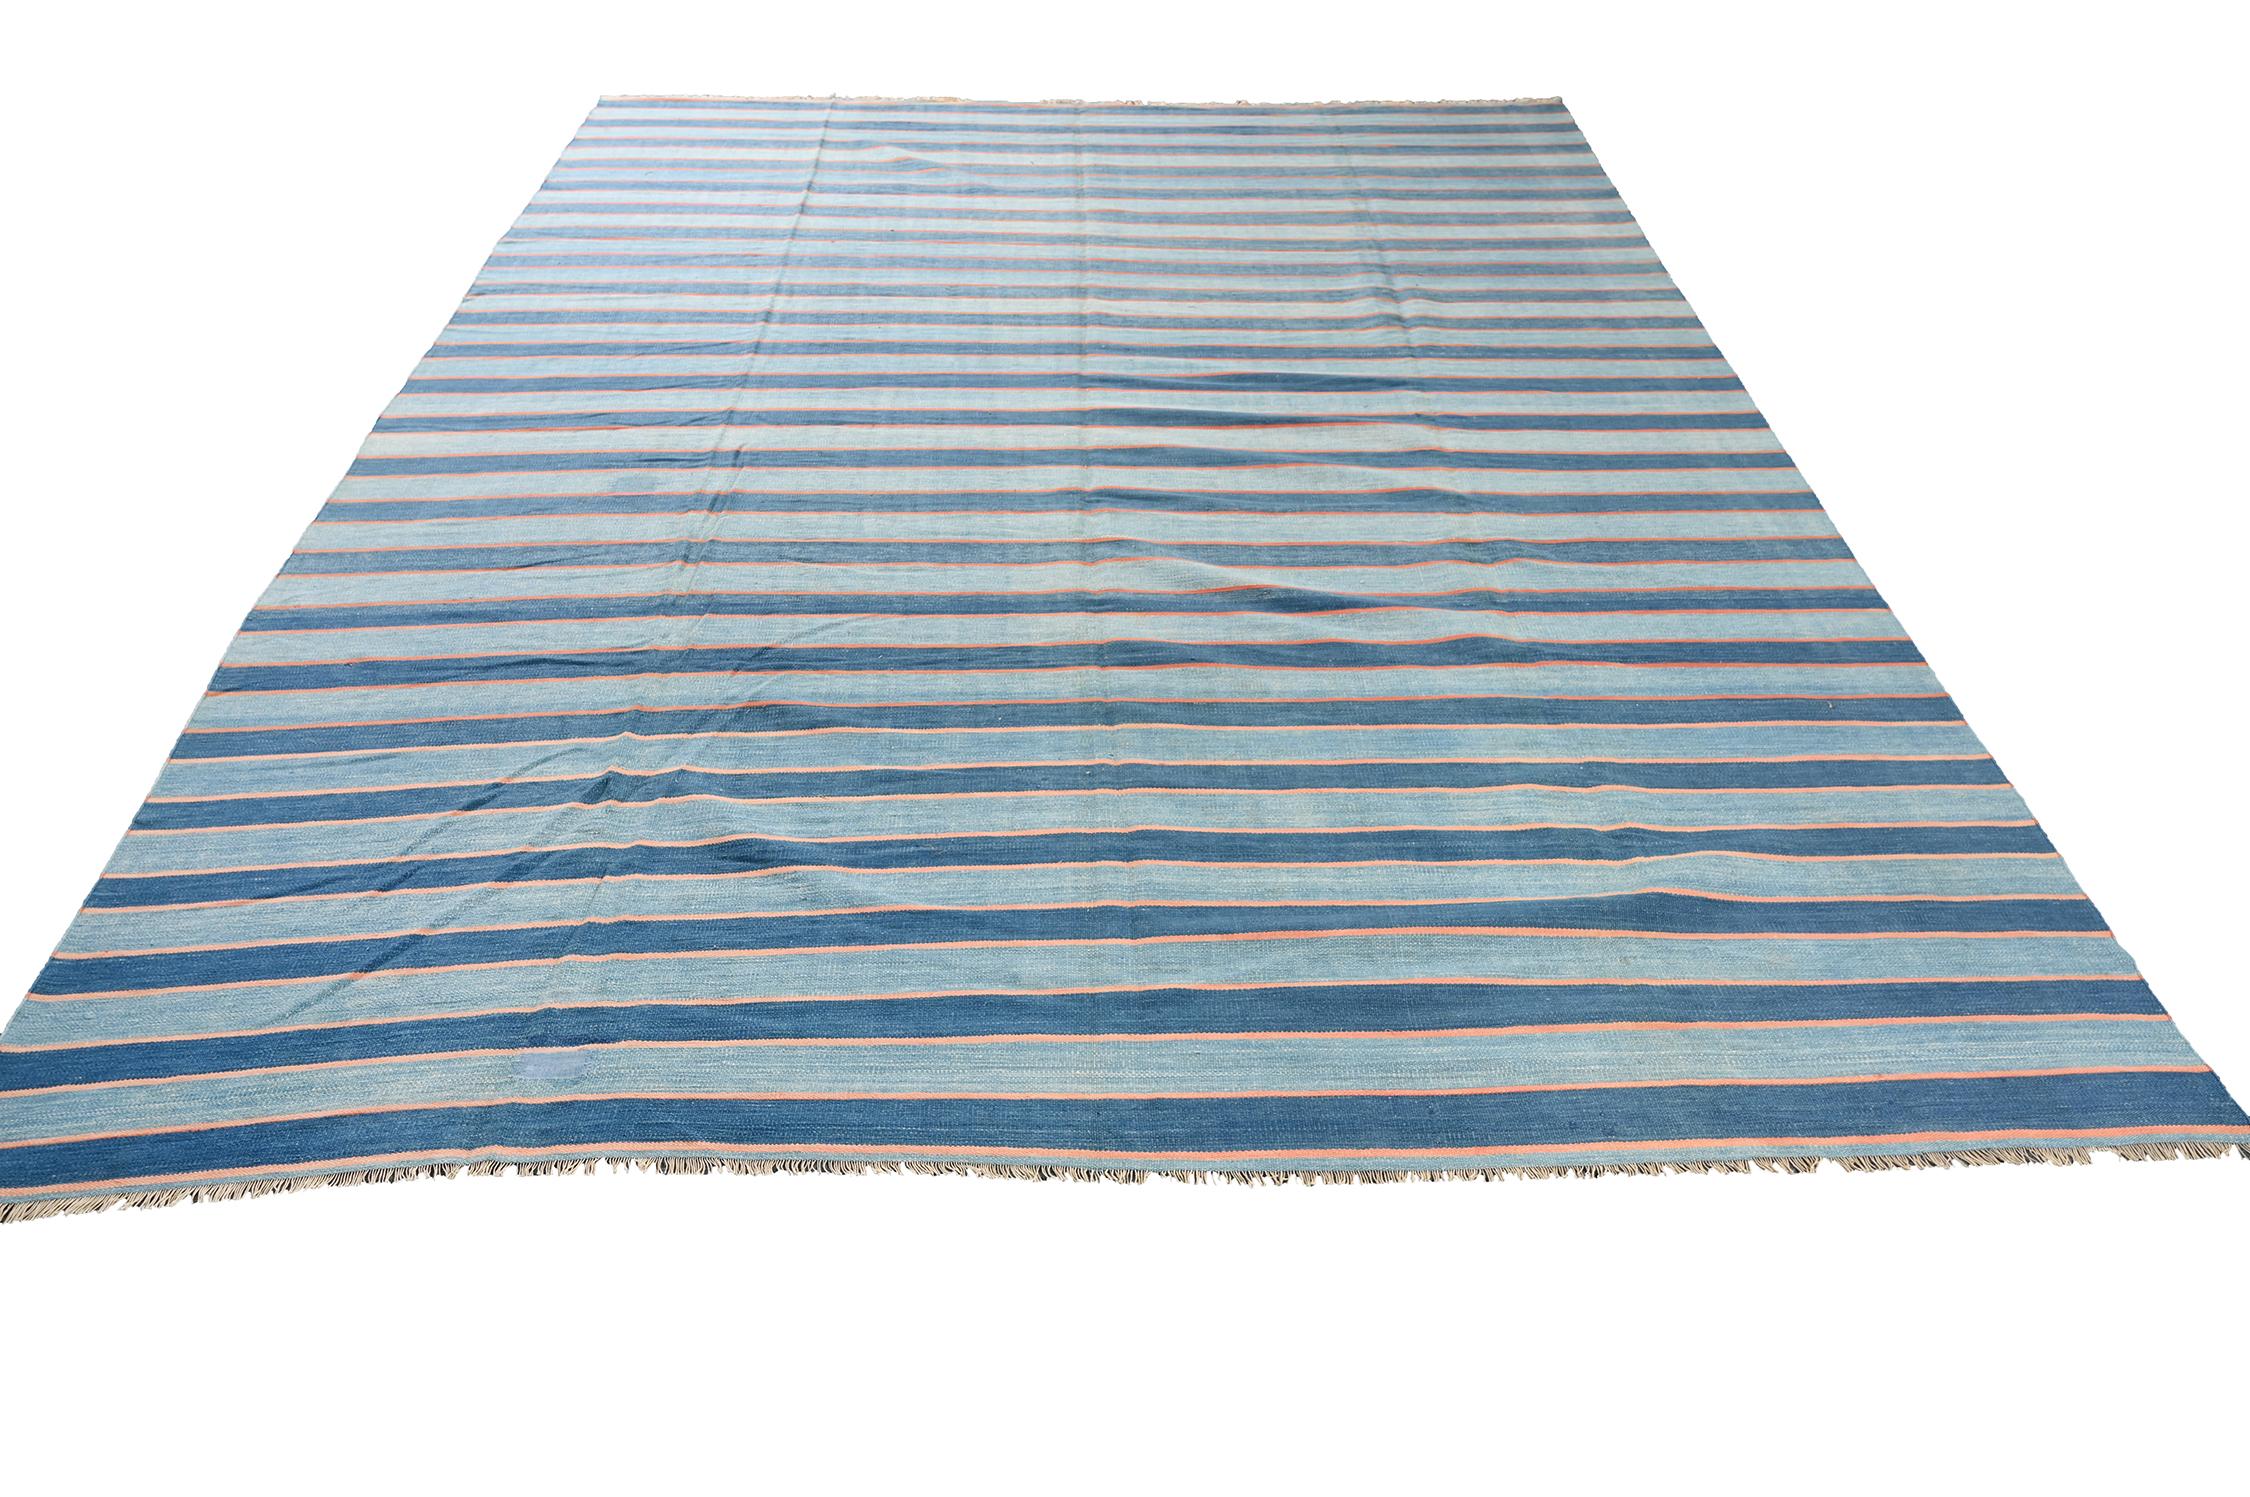 This vintage 9x12 Dhurrie is an exciting new entry in Rug & Kilim's esteemed flat weave collection. Handwoven in cotton, it originates from India circa 1950-1960. 

Further on the Design:

This flat weave prefers a simple series of stripes in